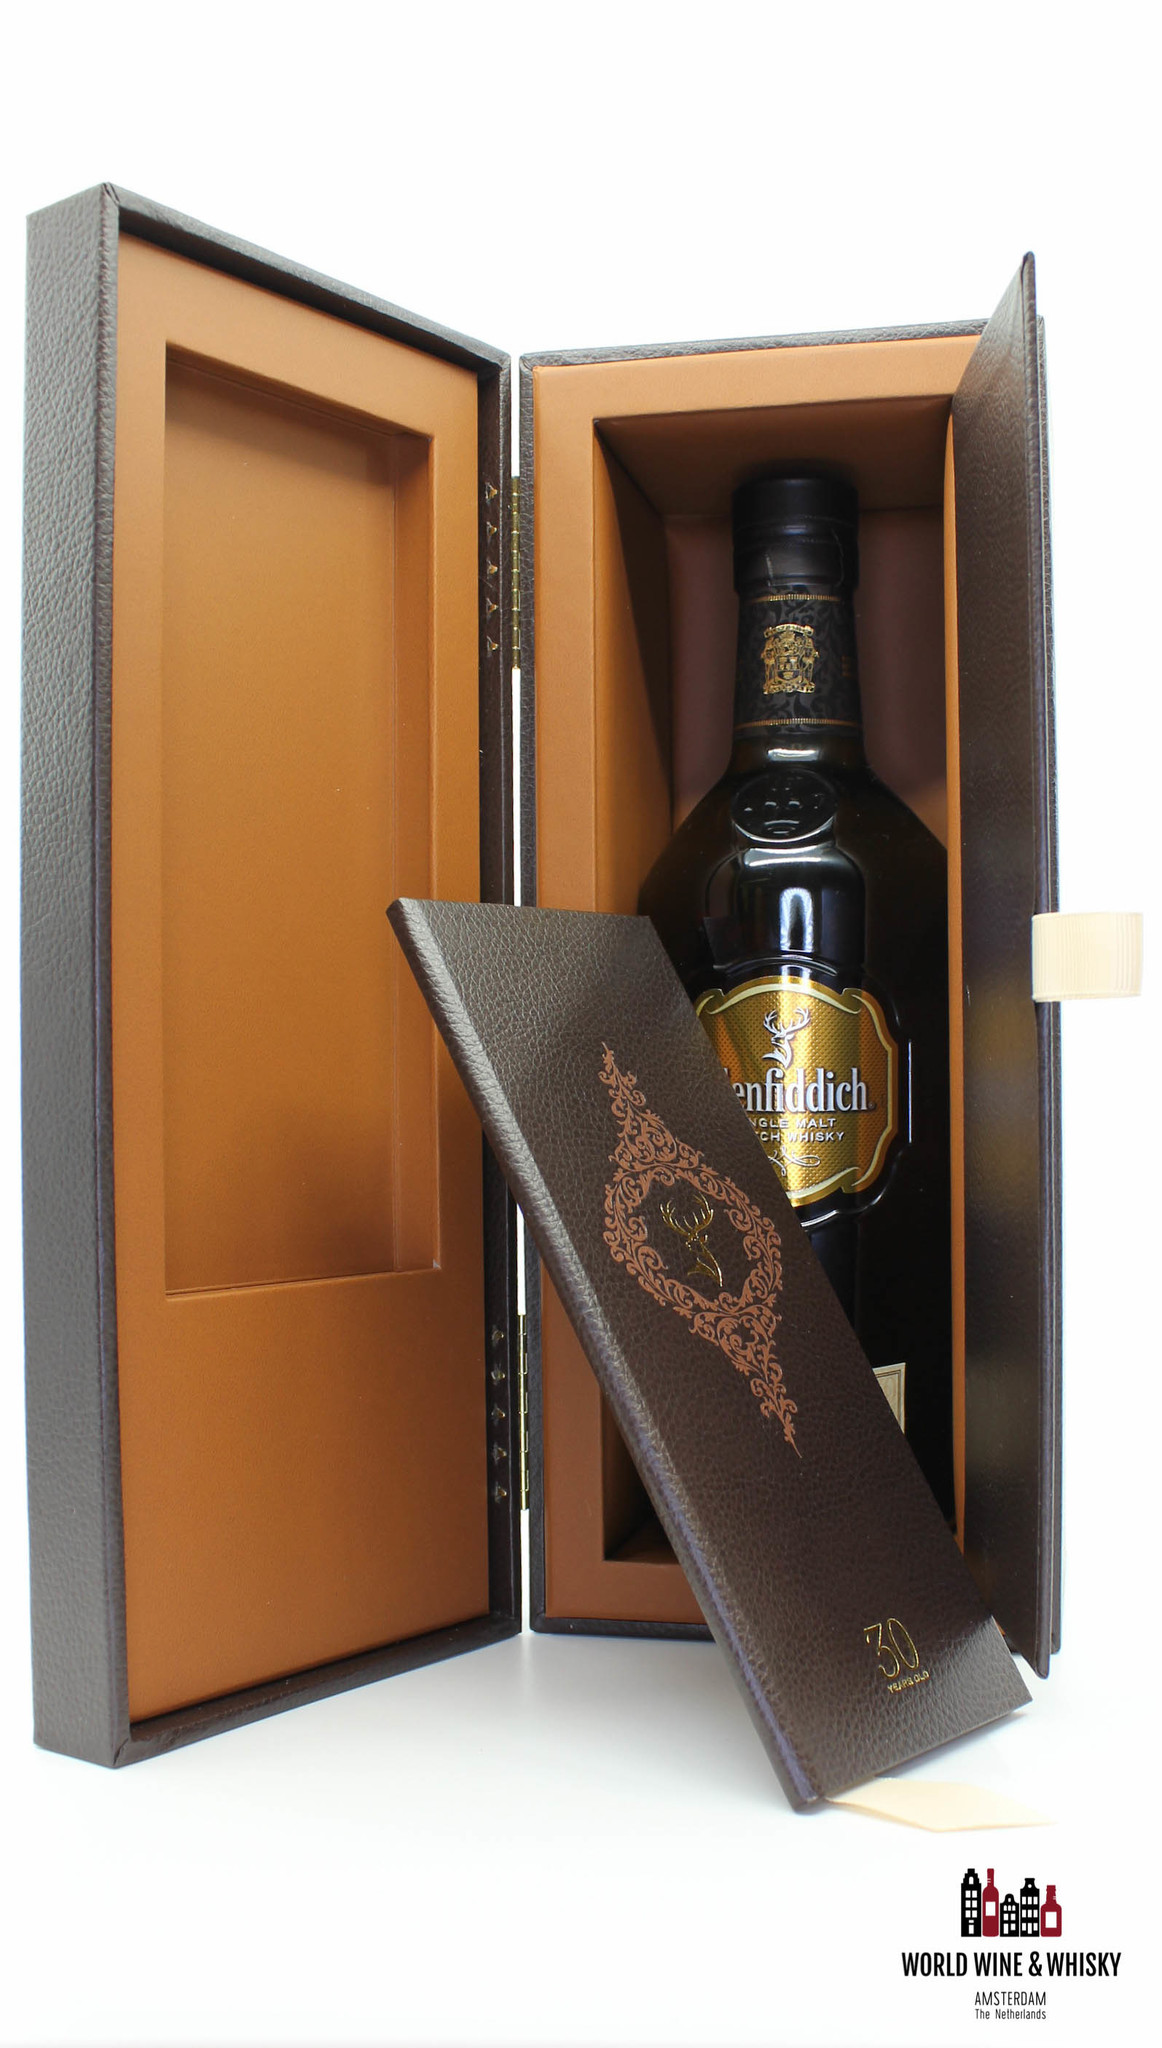 Glenfiddich Glenfiddich 30 Years Old - Cask Selection 00045 43% (in luxury case)